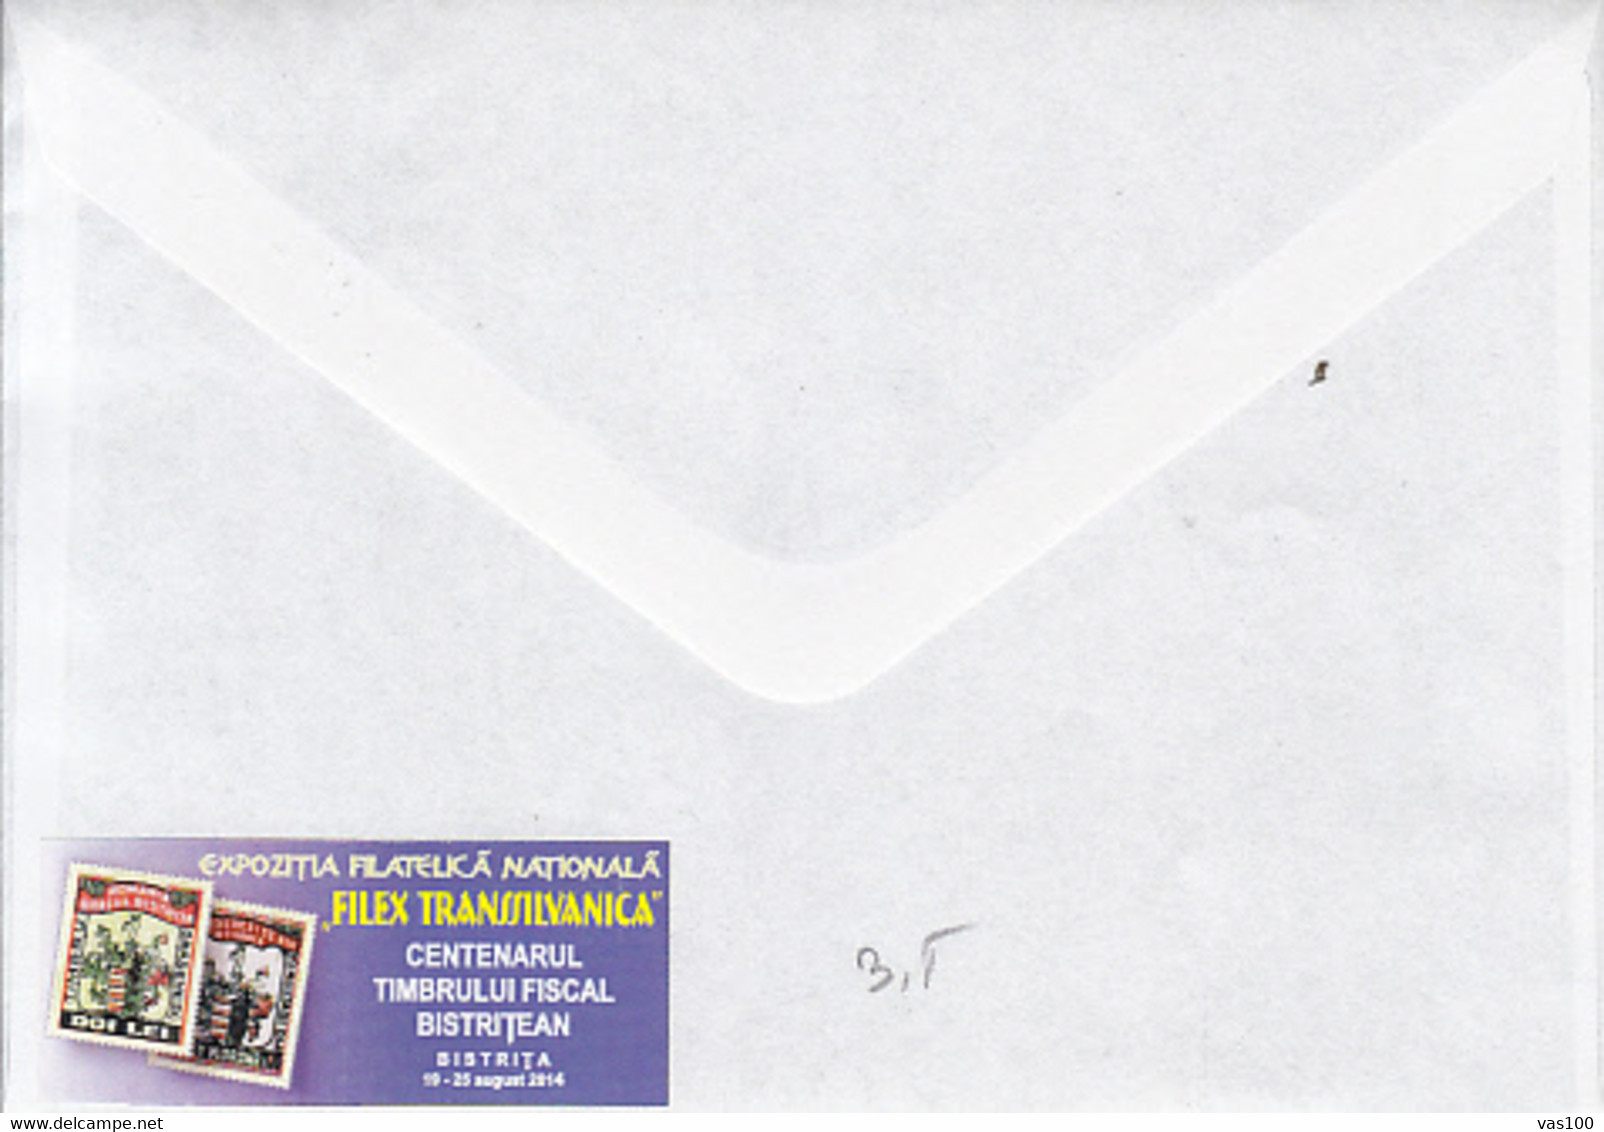 BISTRITA STAMP ISSUE ANNIVERSARY, SPECIAL COVER, 2014, ROMANIA - Covers & Documents